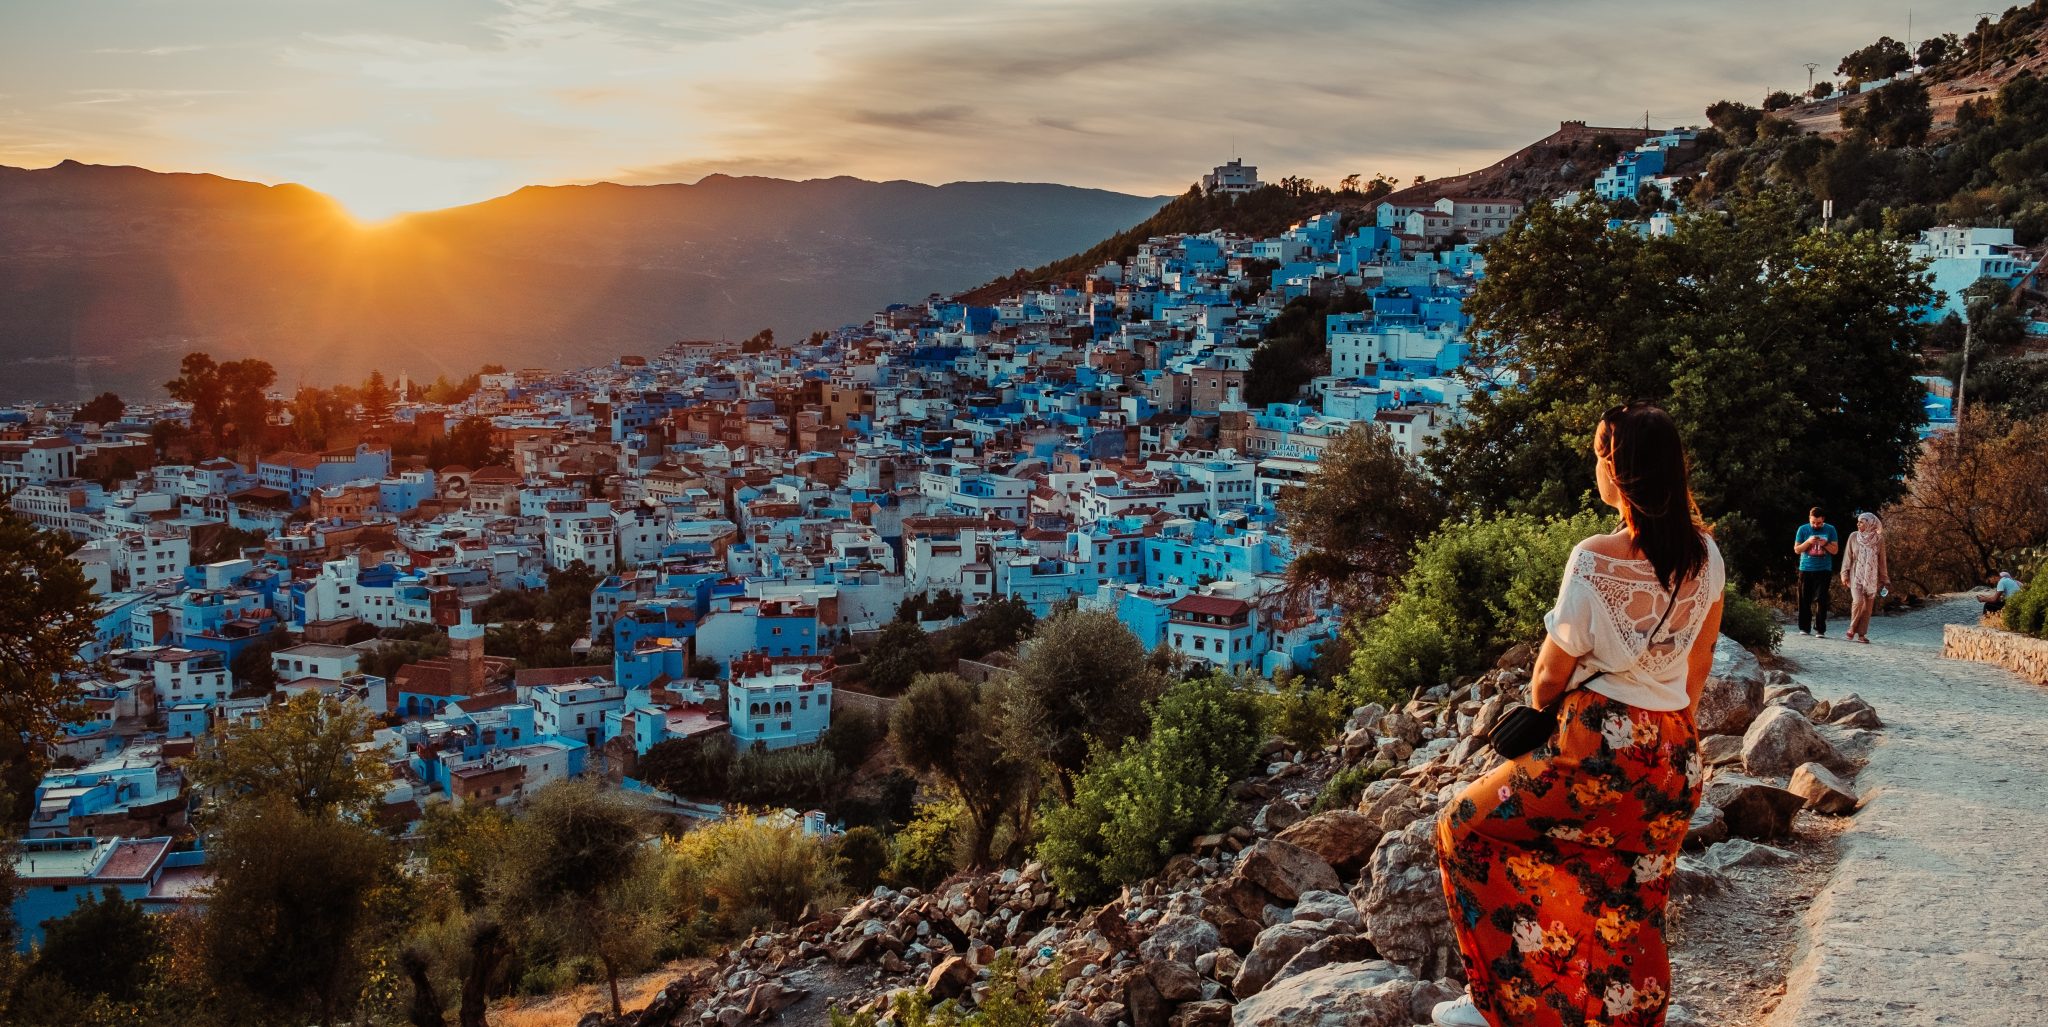 Chefchaouen’s Culture and Beauty: Discover the Magic of Morocco’s Blue City